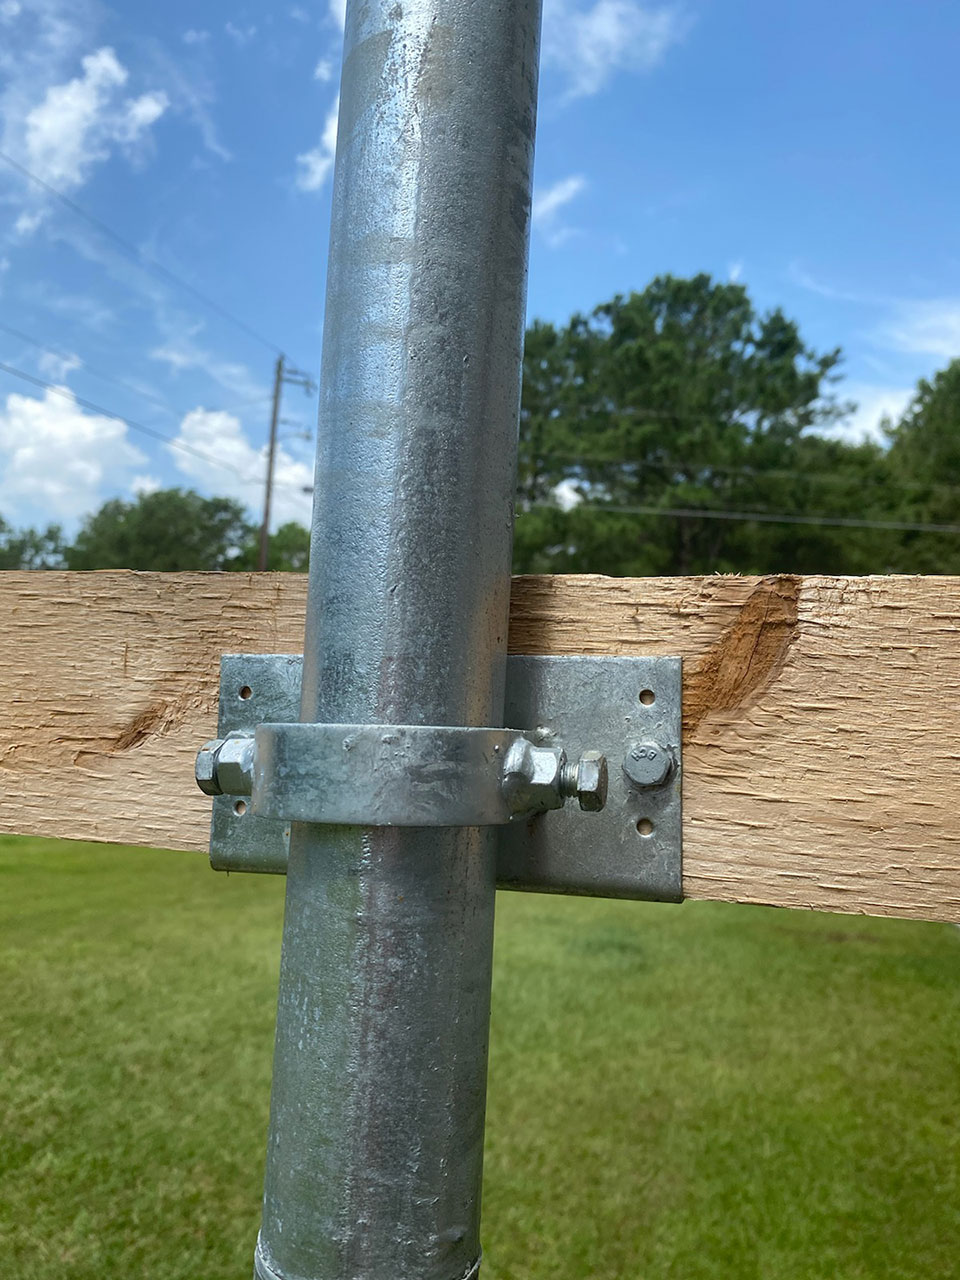 Customer Photo - Cedar Board and Batten Privacy Fence Built With Chain Link Fence Posts and Wood to Steel Fence Brackets - Abita Springs, LA